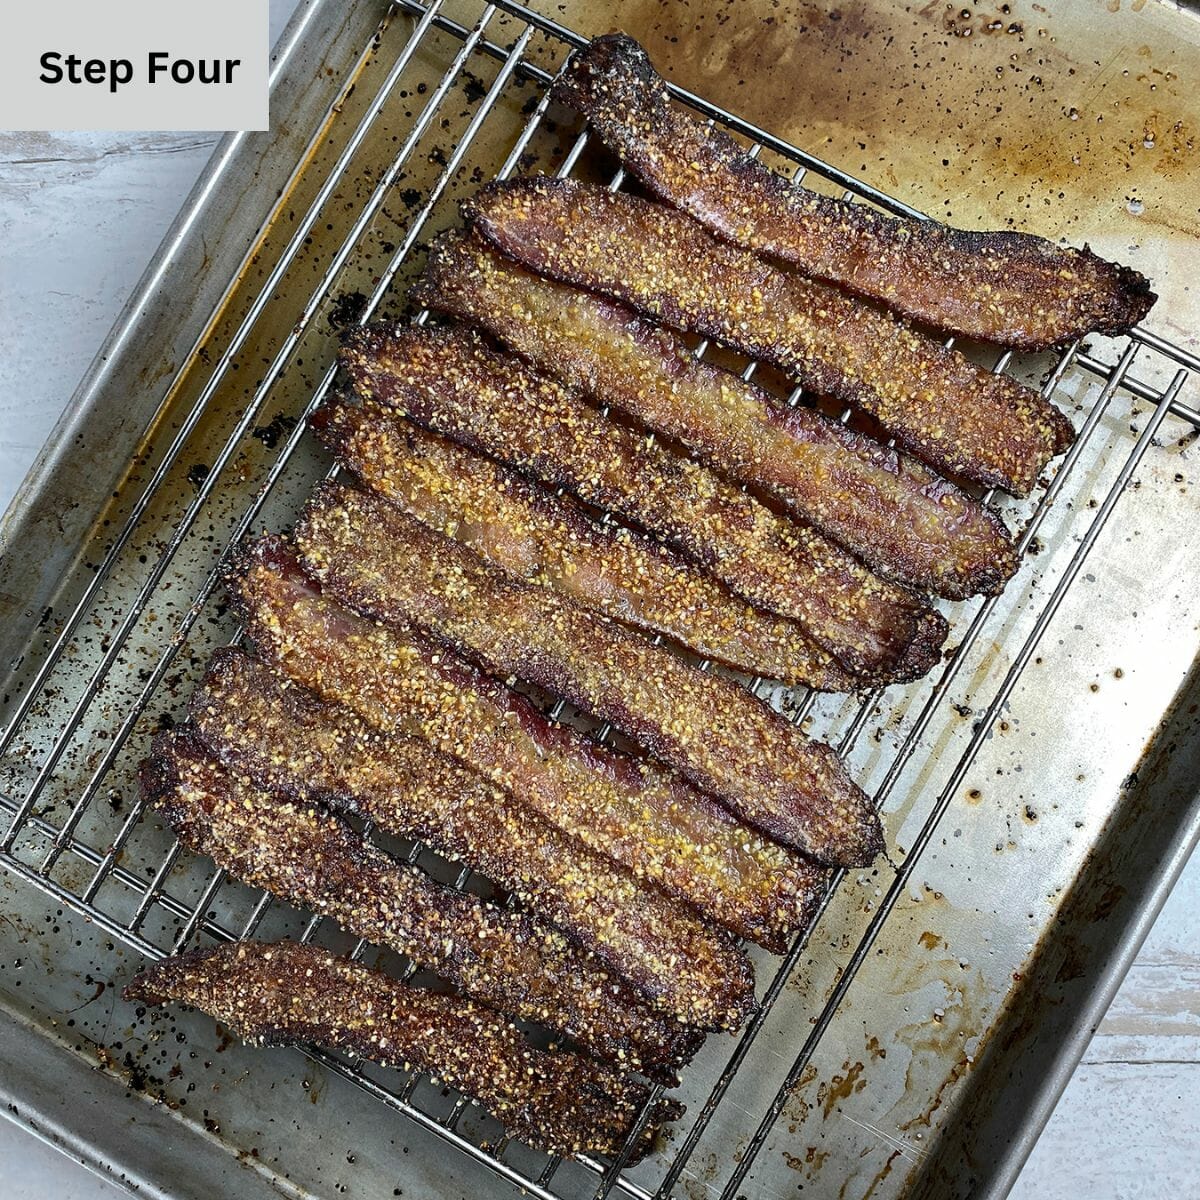 Cooked brown sugar bacon on a rack and baking pan.